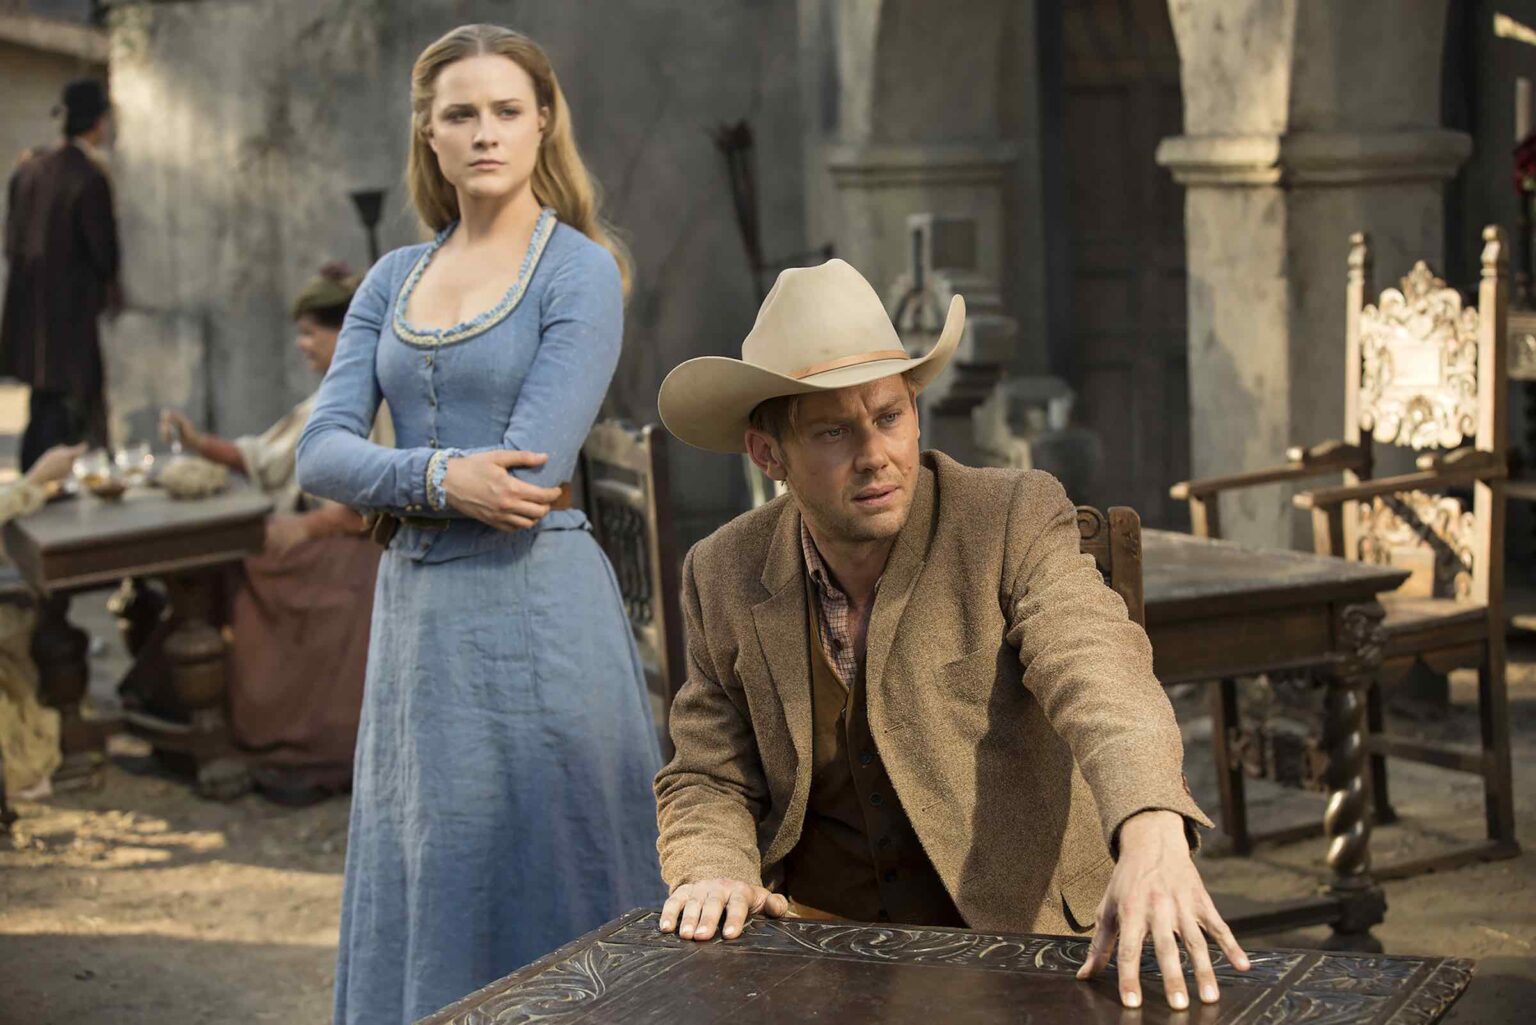 HBO’s highly-acclaimed series 'Westworld' has returned for a new season. Here's everything to know about Dolores and the new thrilling narrative ahead.